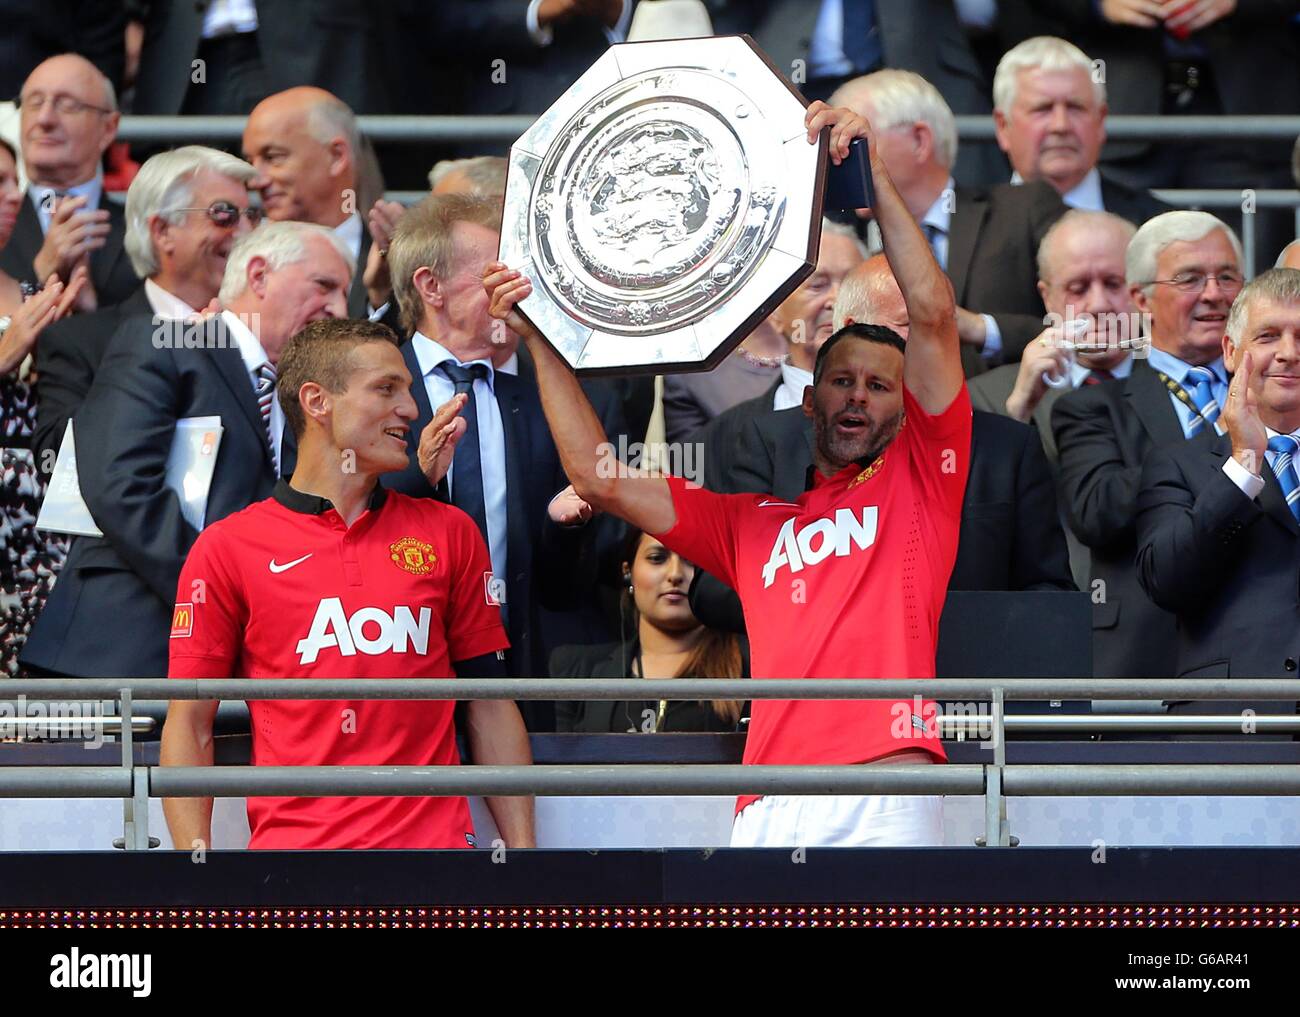 Manchester United's Ryan Giggs lifts the FA Community Shield trophy Stock Photo